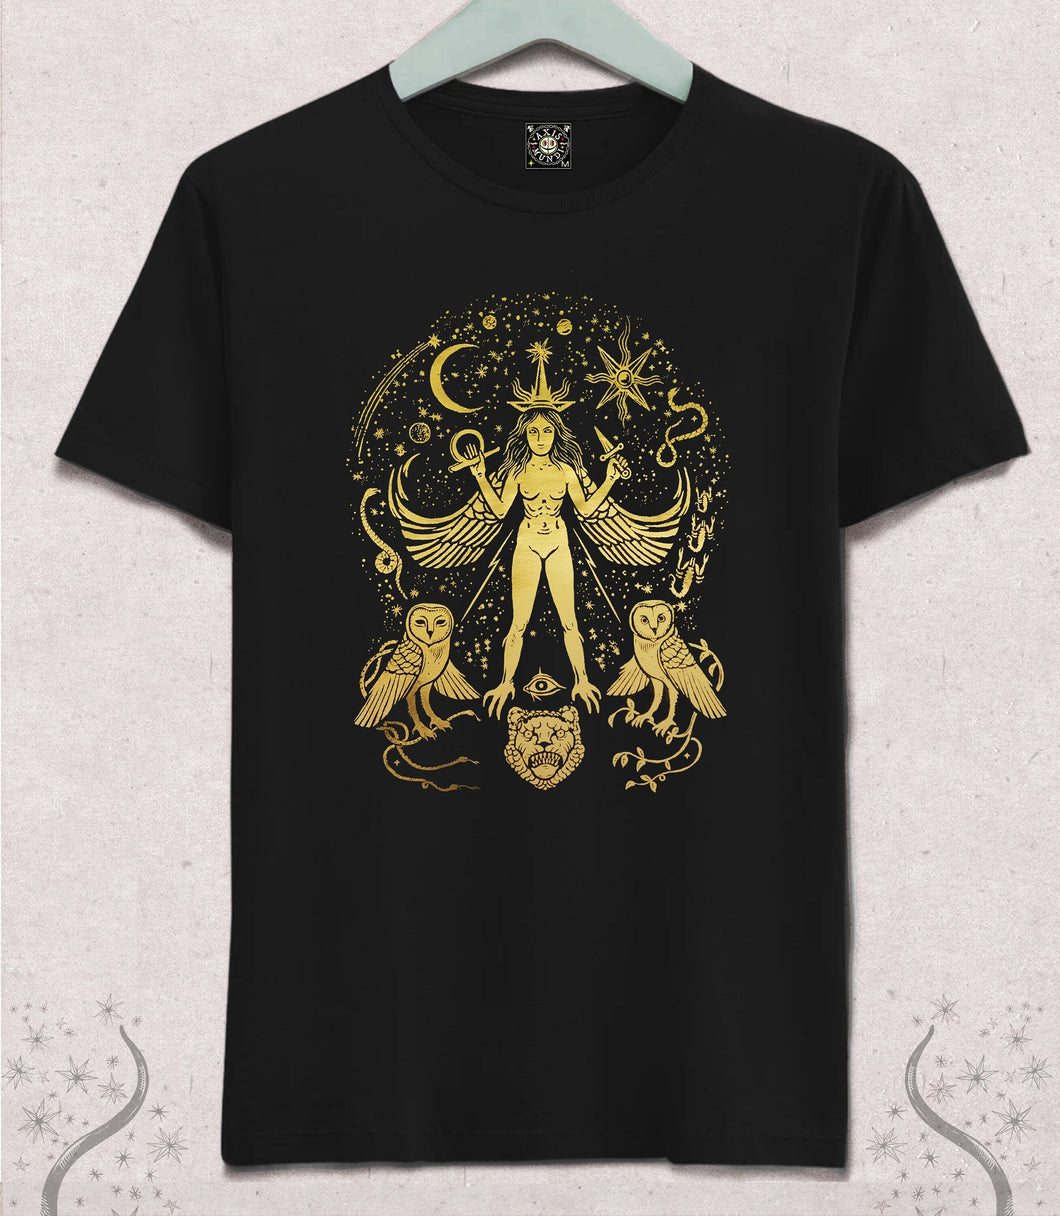 Gold Inanna T-shirt with stars